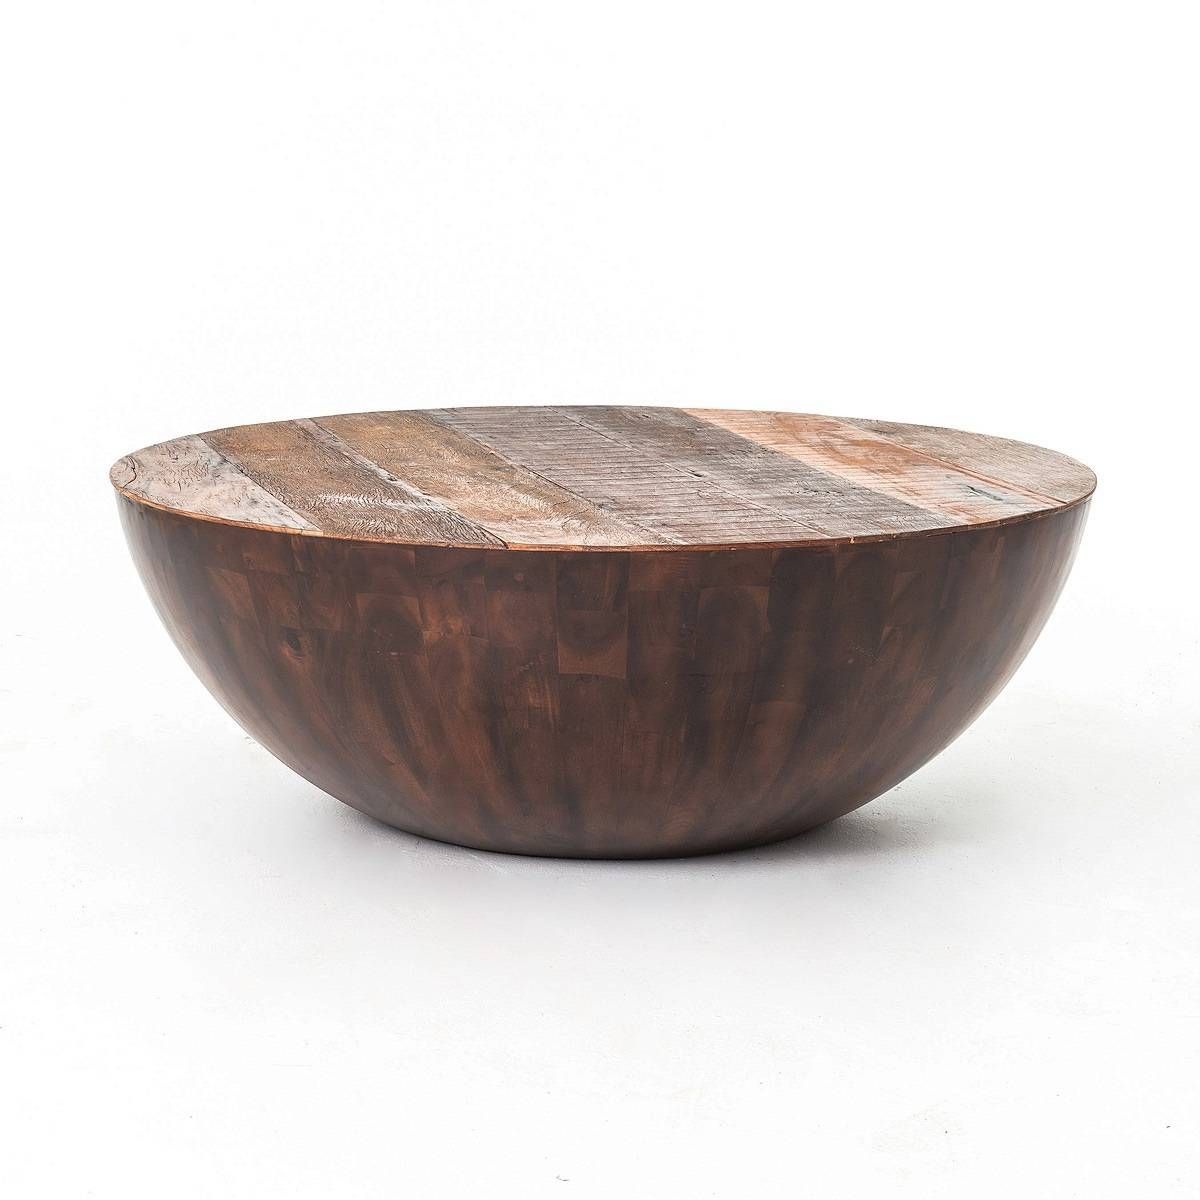 Round Coffee Table: Beautiful Solid Wood Round Coffee Table Design In Large Solid Wood Coffee Tables (View 14 of 15)